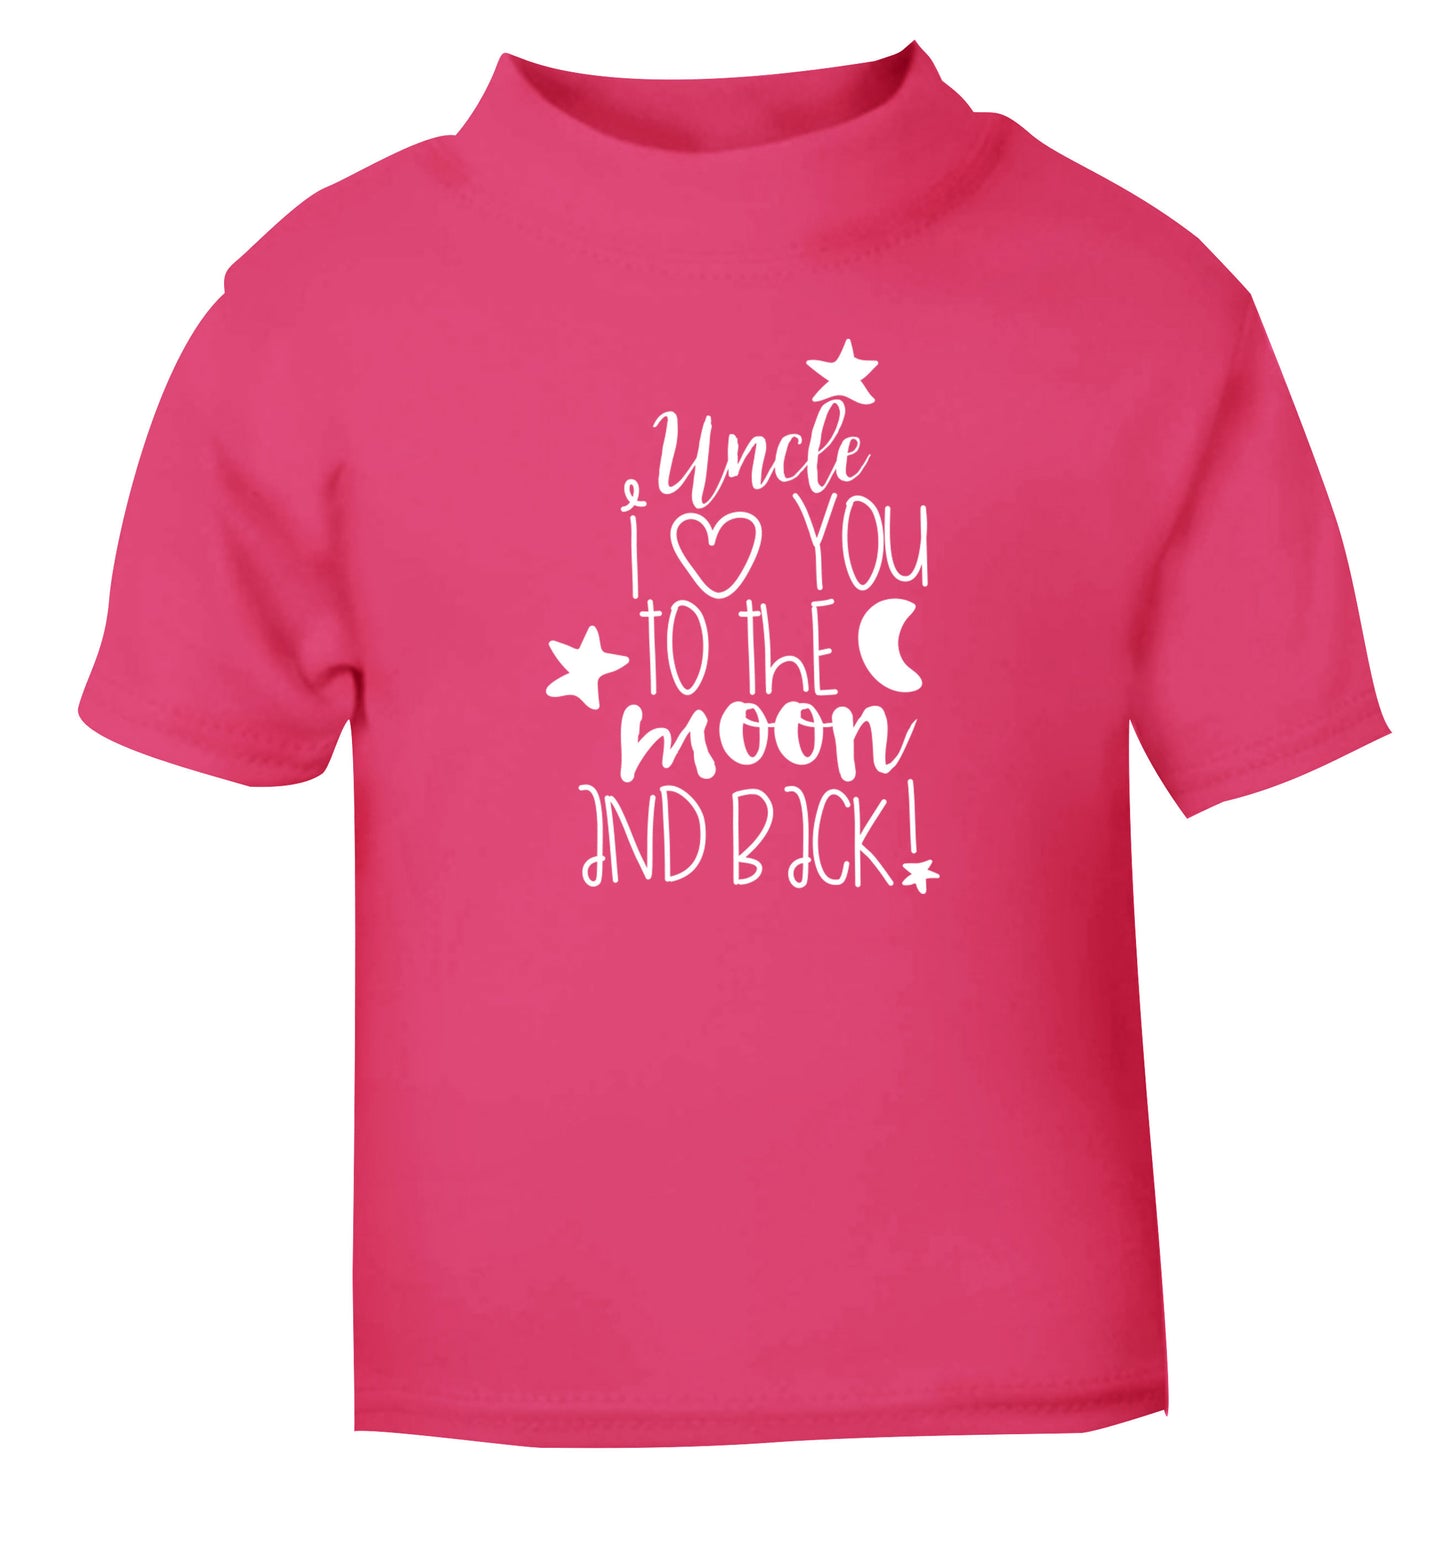 Uncle I love you to the moon and back pink Baby Toddler Tshirt 2 Years